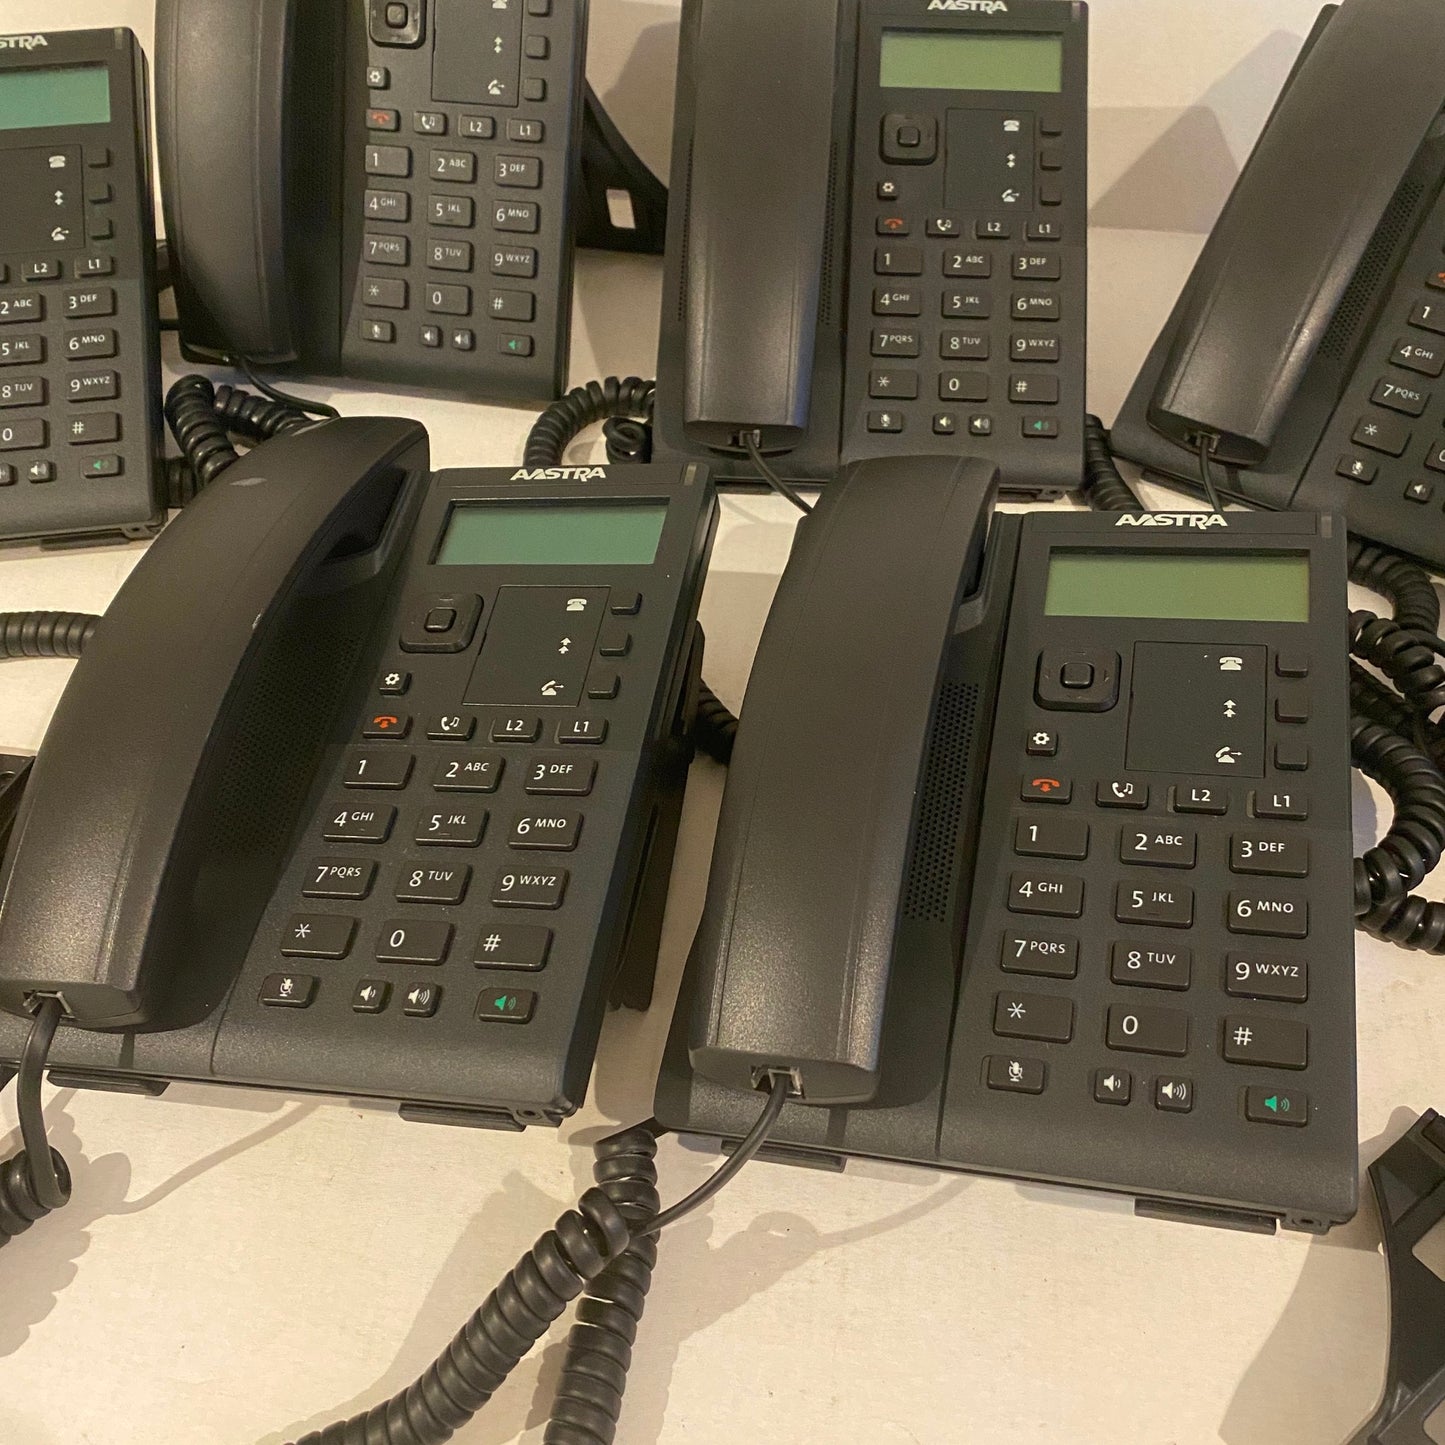 Lot of 7 - Aastra Mitel 6863i VoIP Business Phone Handset And Stand